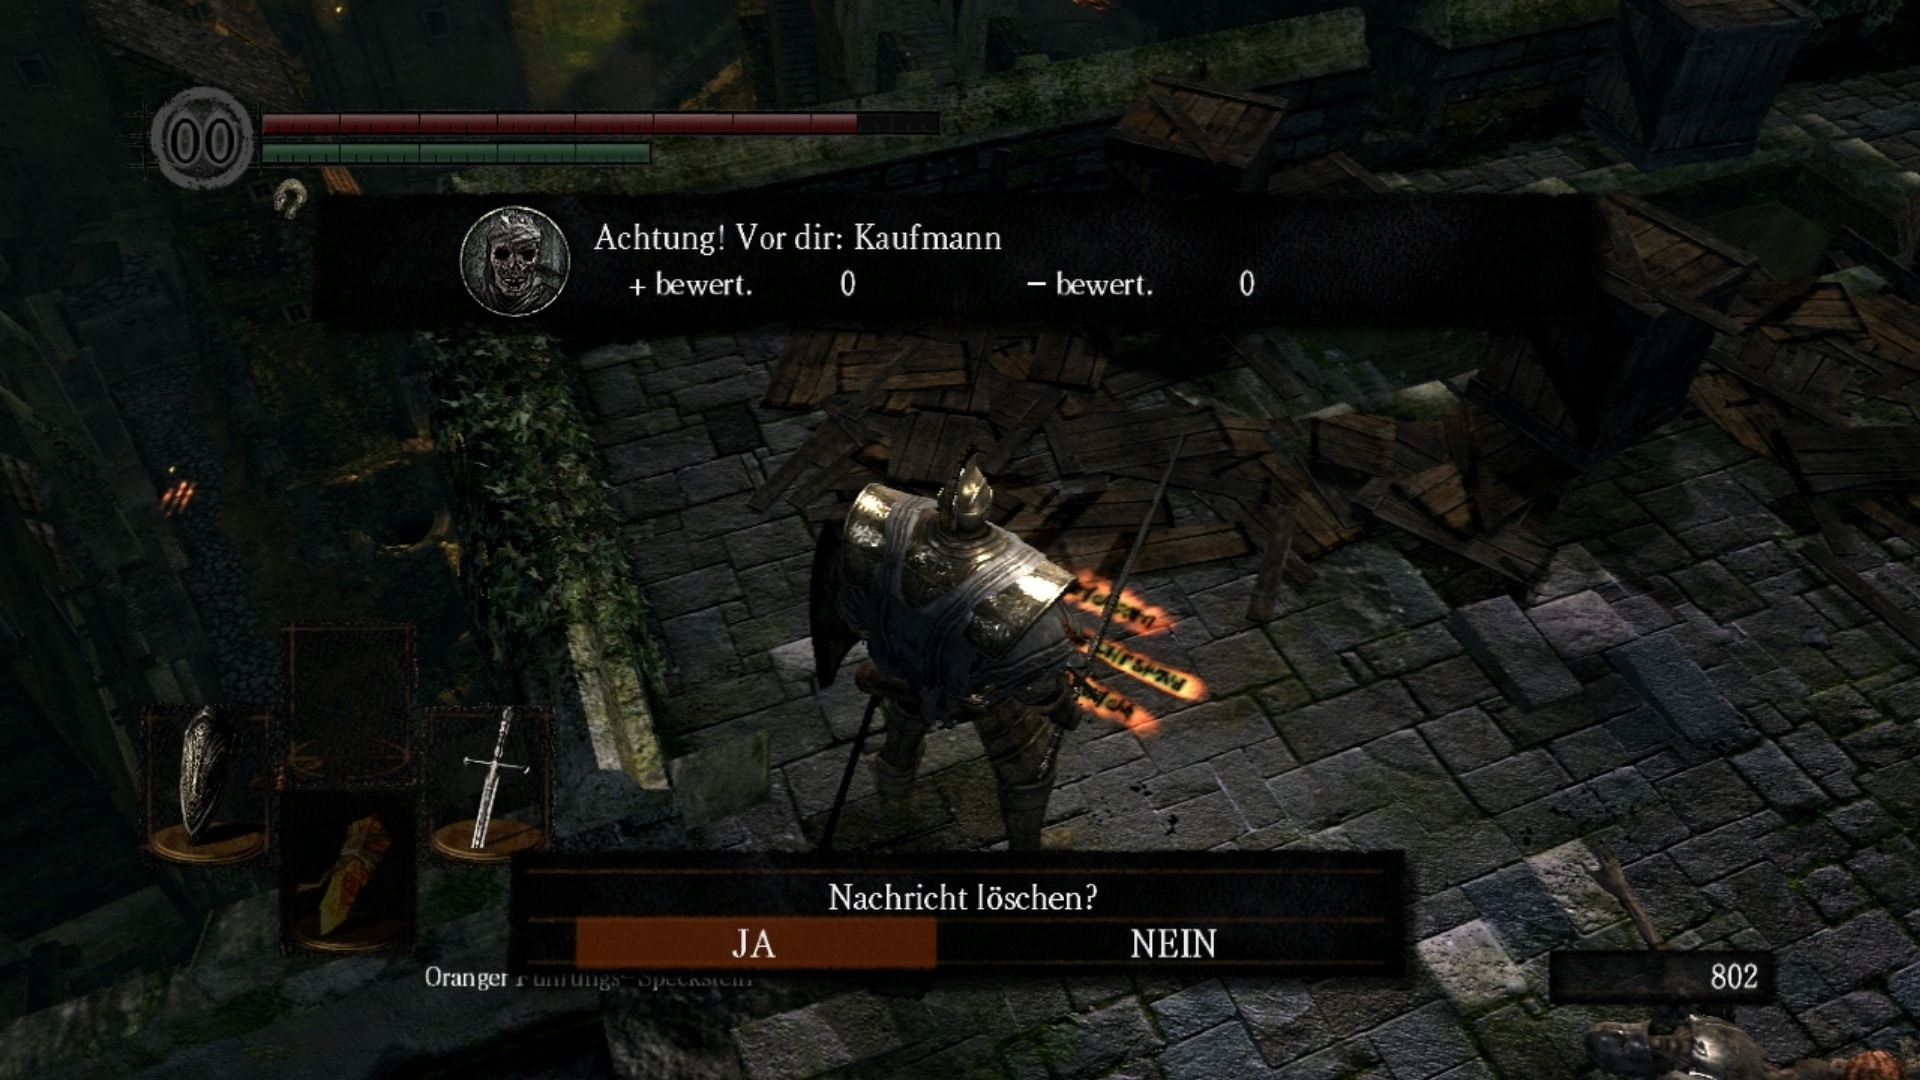 Such (sometimes unintentionally cryptic) messages are an integral part of Dark Souls. In Elden Ring, they return.